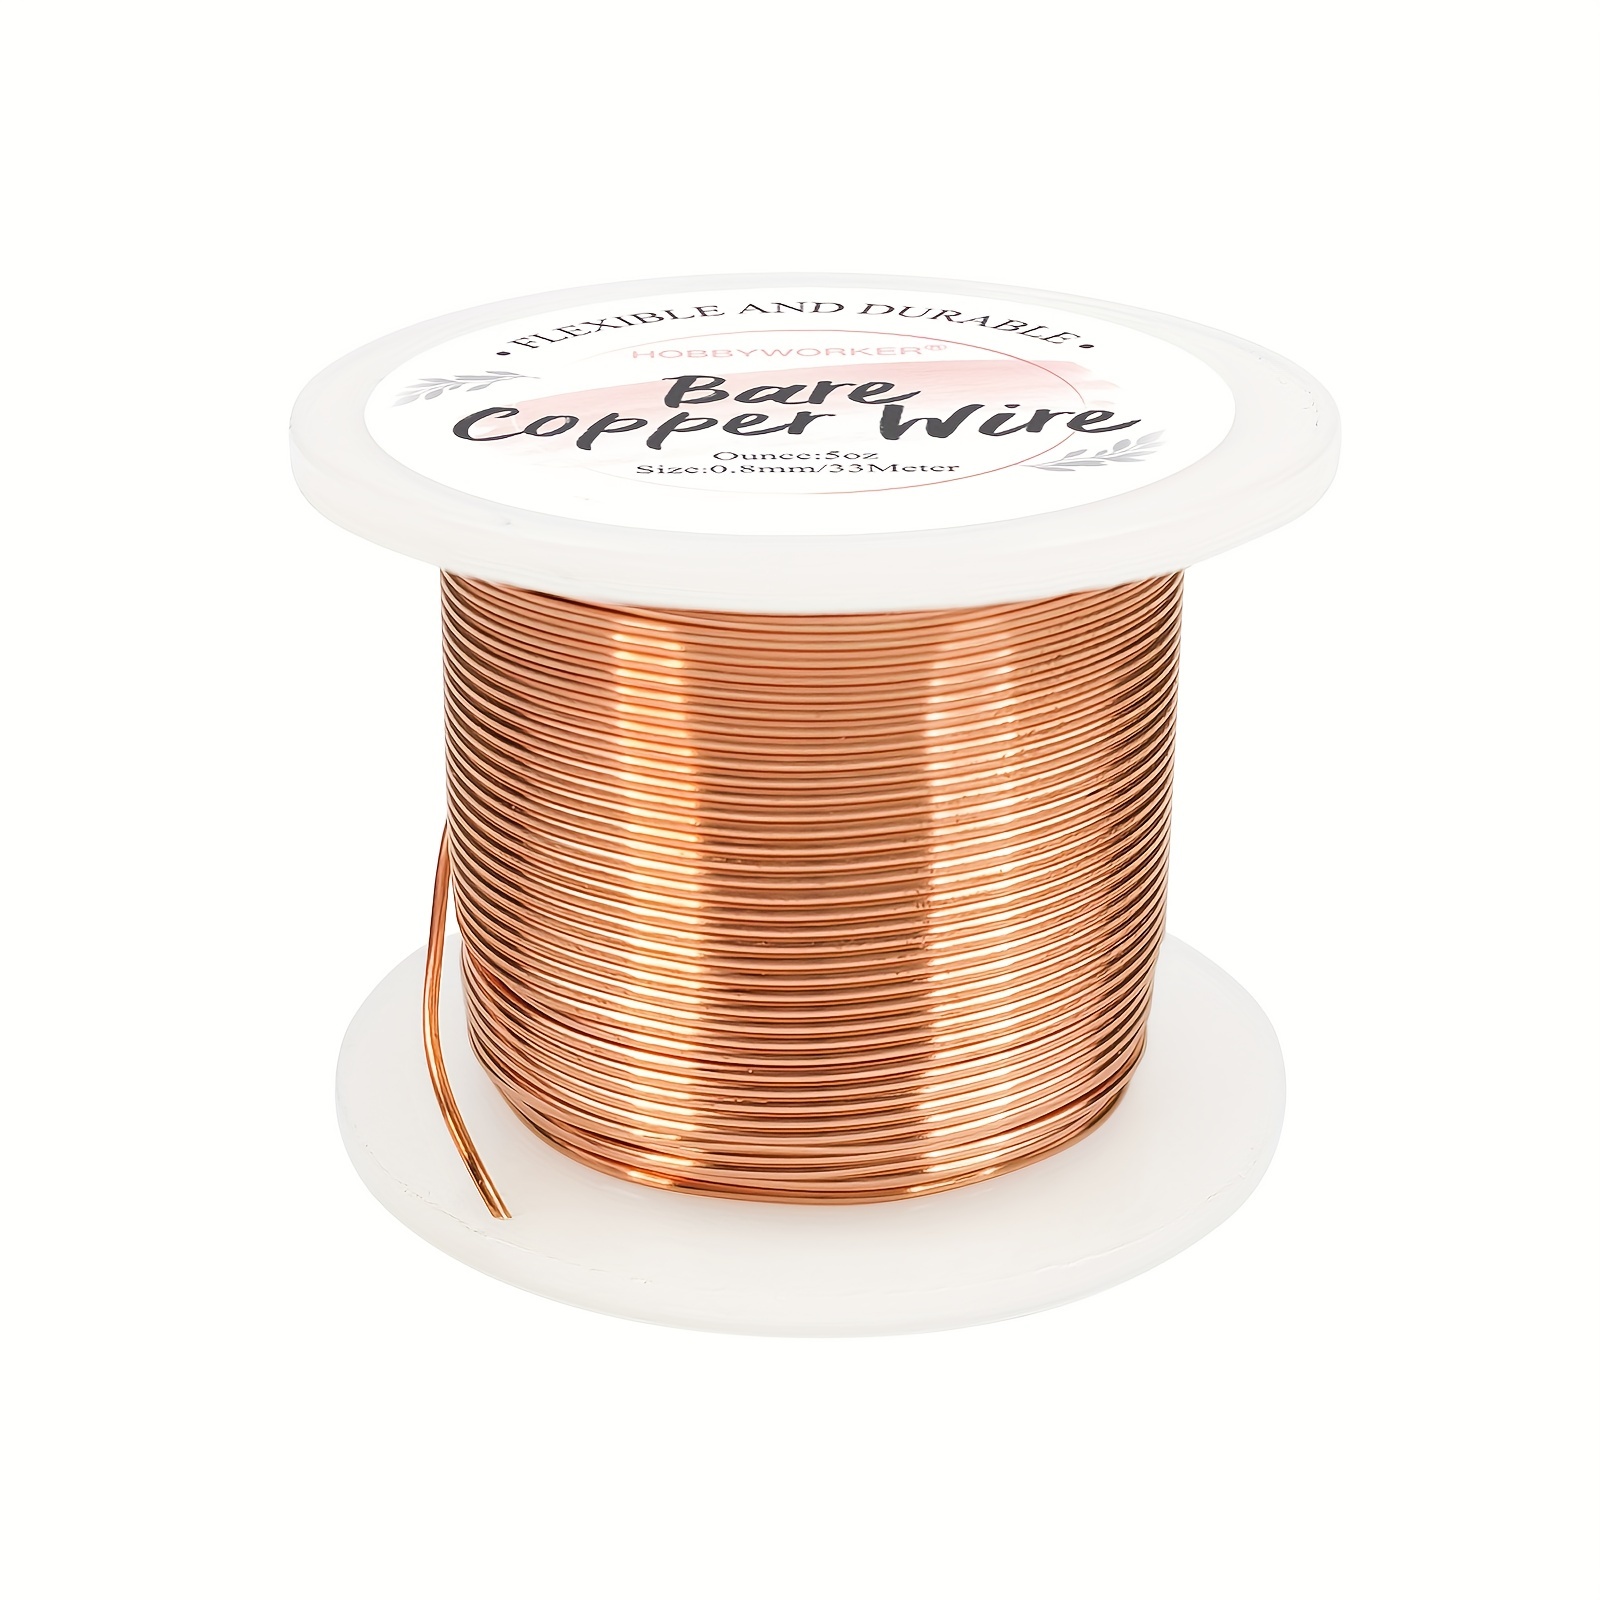 Copper Color Aluminum Bendable Craft Wire, 12 Gauge Anodized Jewelry  Making, Beading, Floral, Sculpting, Wire Weaving 100FT, 30m 